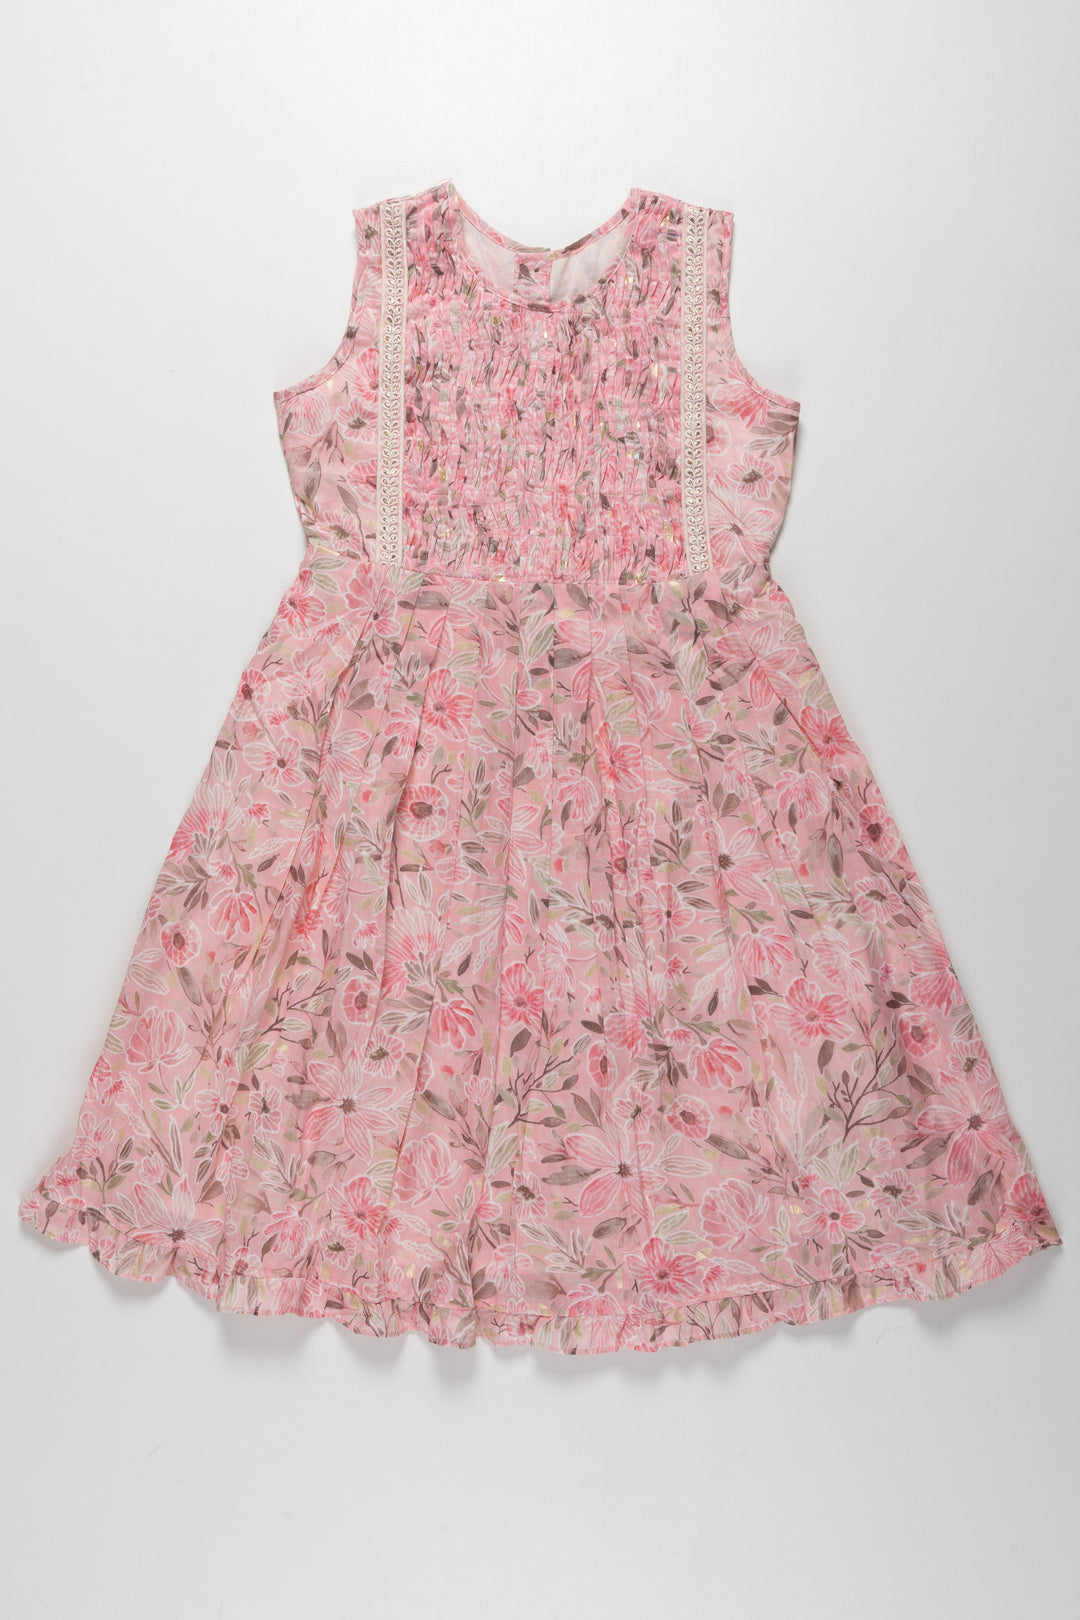 The Nesavu Girls Cotton Frock Blossom Pink Floral Frock with Lace Detailing for Girls Nesavu 16 (1Y) / Pink / Chanderi GFC1228B-16 Girls Pink LaceTrim Floral Frock | Charming Springtime Dress | The Nesavu